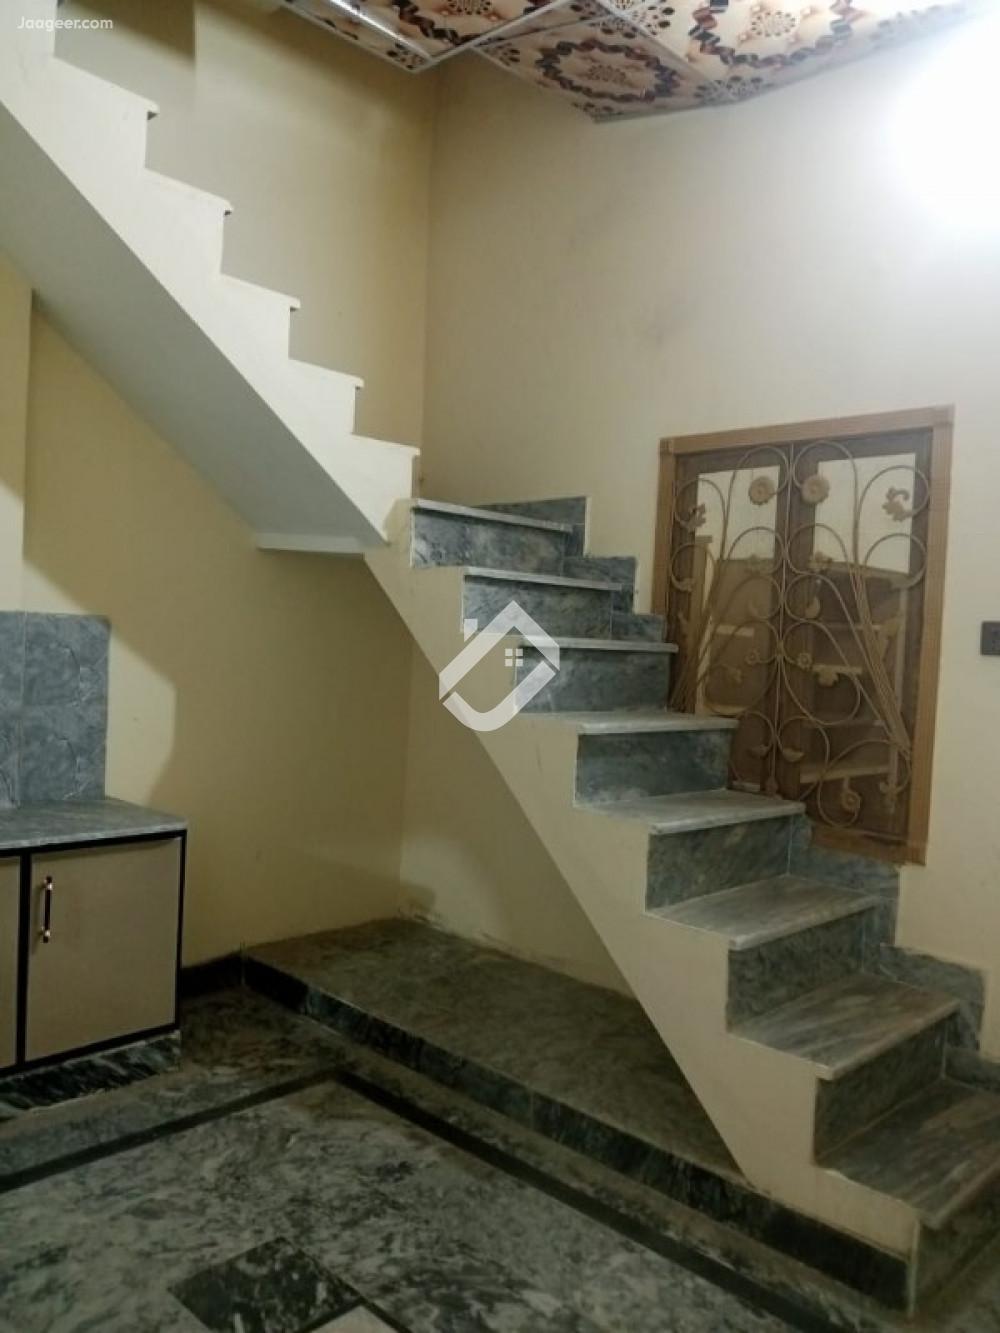 View  2.5 Marla Double Storey House For Sale In Zafar Colony Bhalwal Road  in Zafar Colony, Sargodha